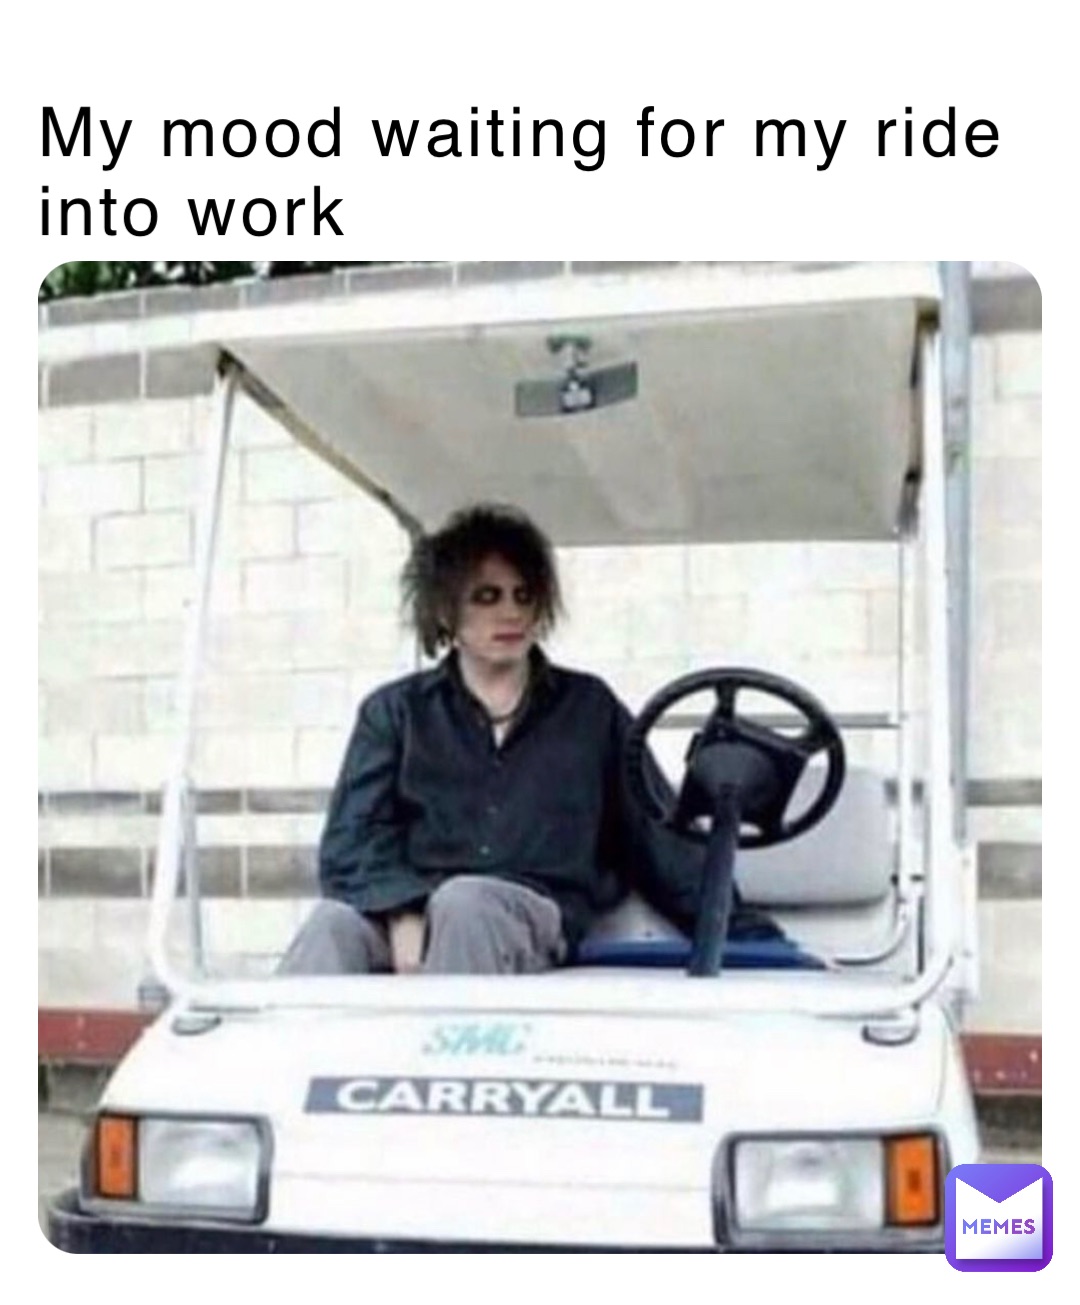 My mood waiting for my ride into work